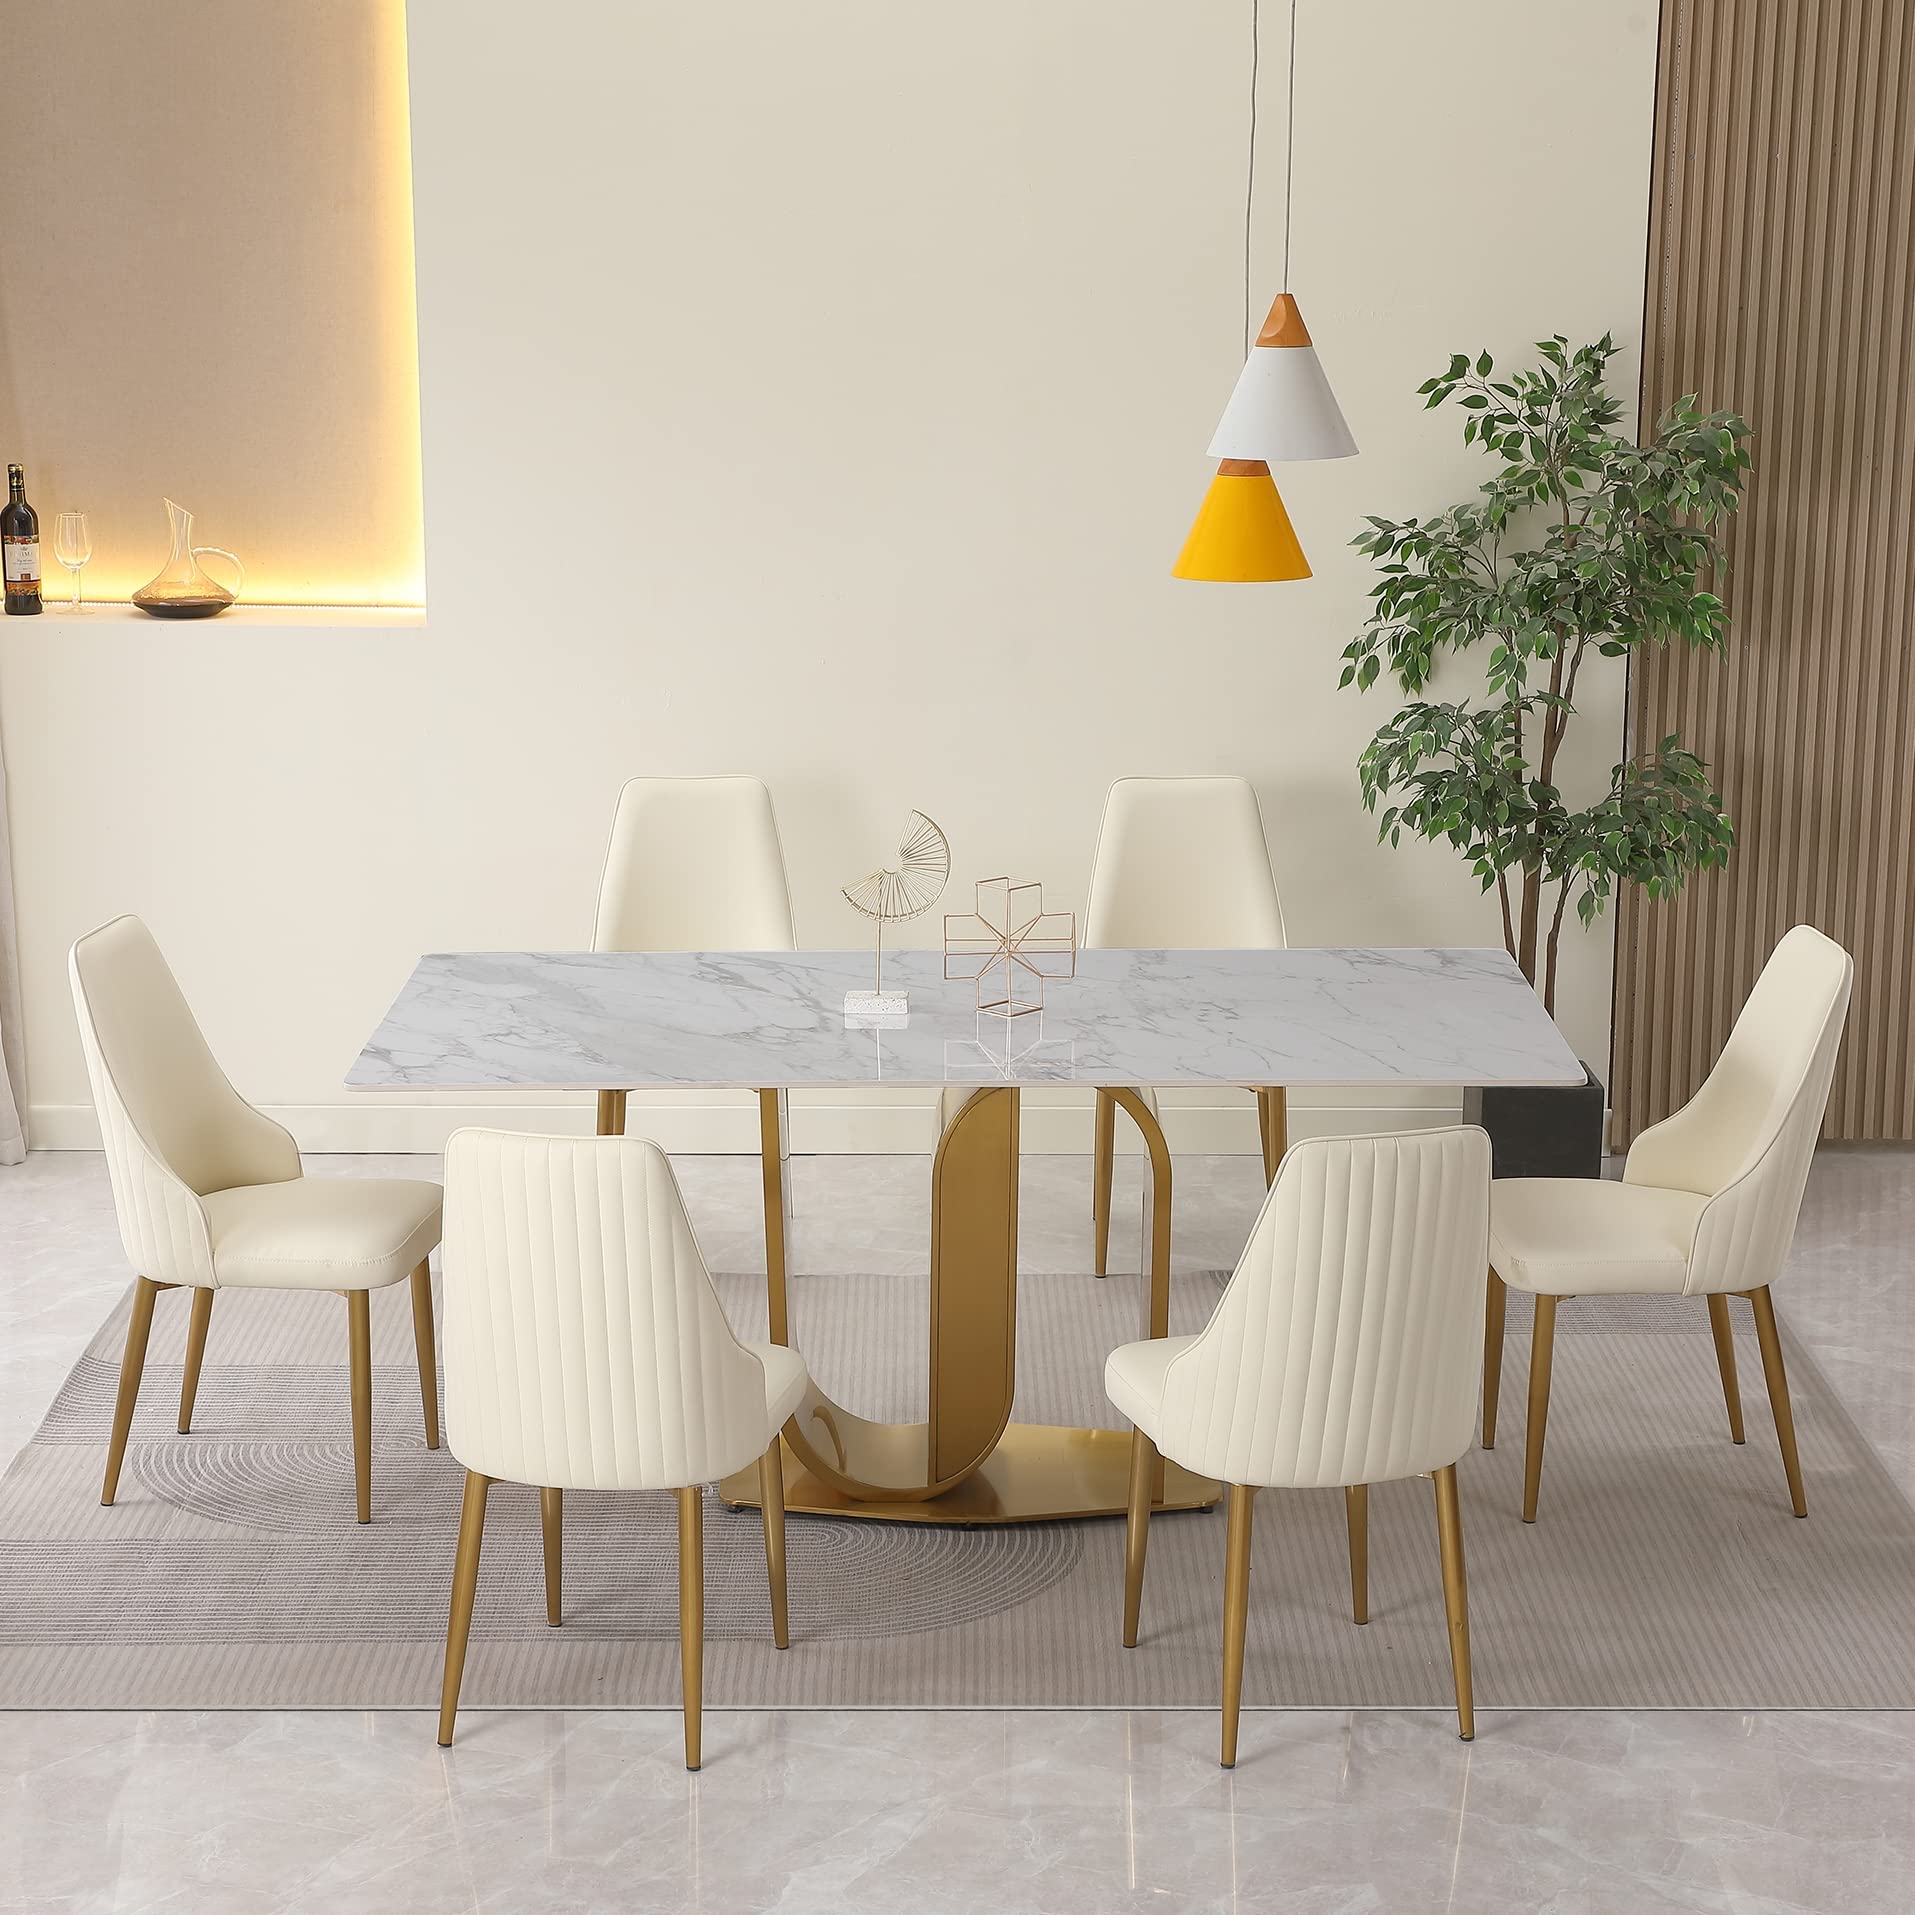 Montary® 71" Gold U-Shaped Sintered Stone Table Top Dining Table Set for 6 White Chairs